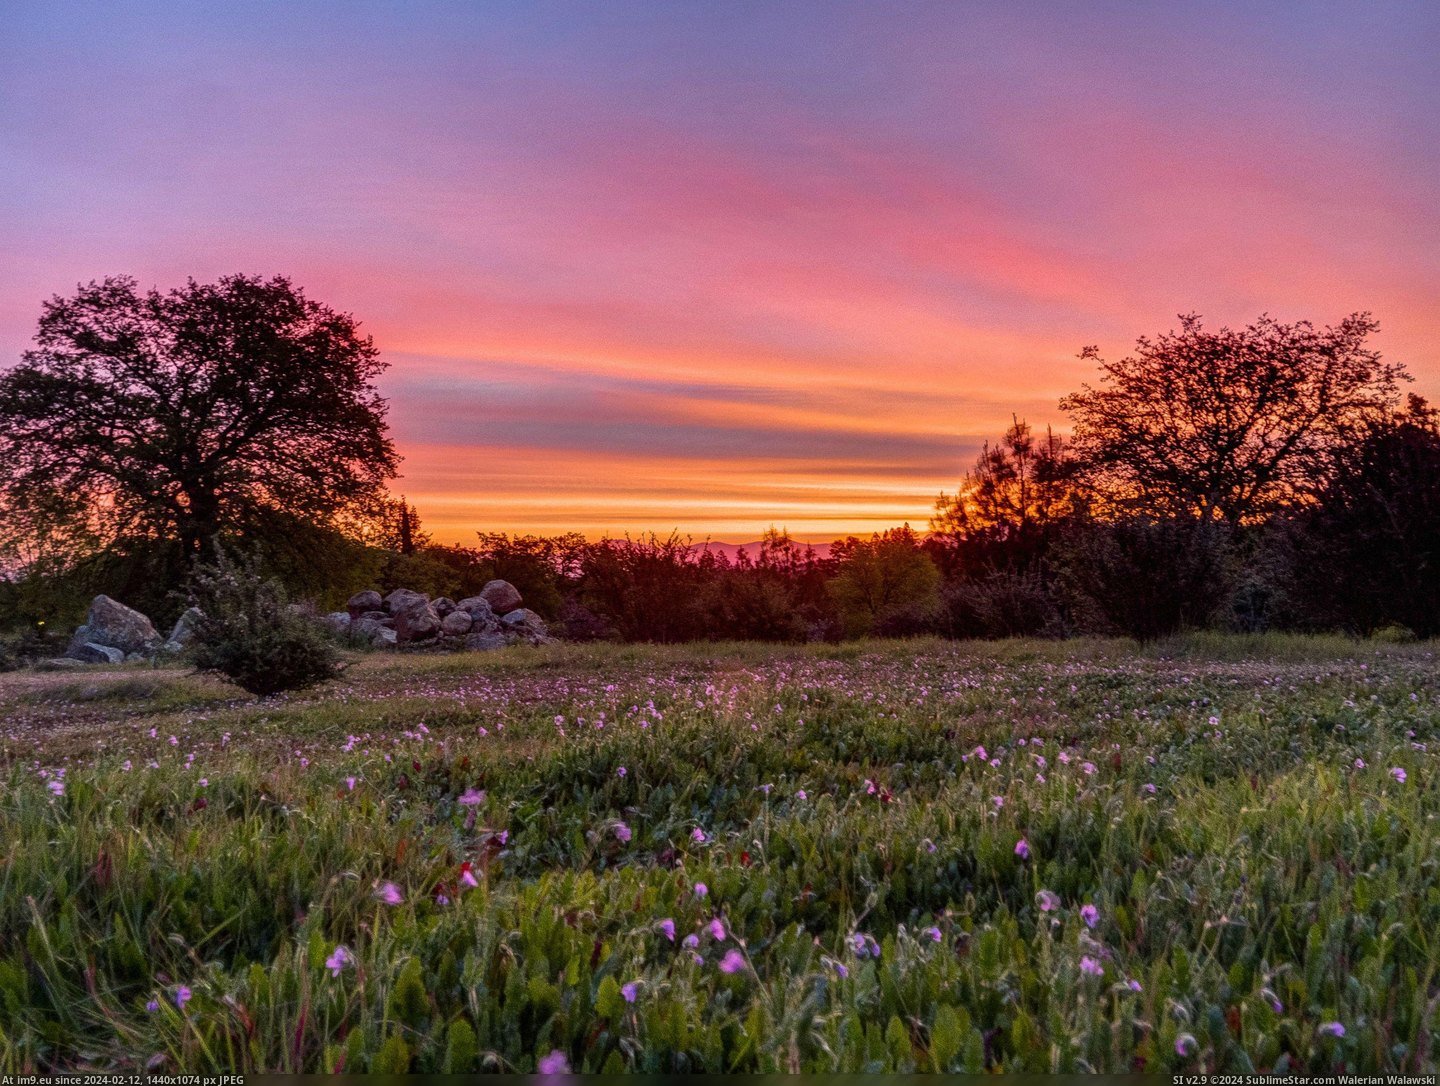 #California #Sunrise #3000x2250 #Redding #Backyard #March [Earthporn] Today's (March 10, 2015) sunrise from my backyard in Redding California. [3000x2250] Pic. (Изображение из альбом My r/EARTHPORN favs))